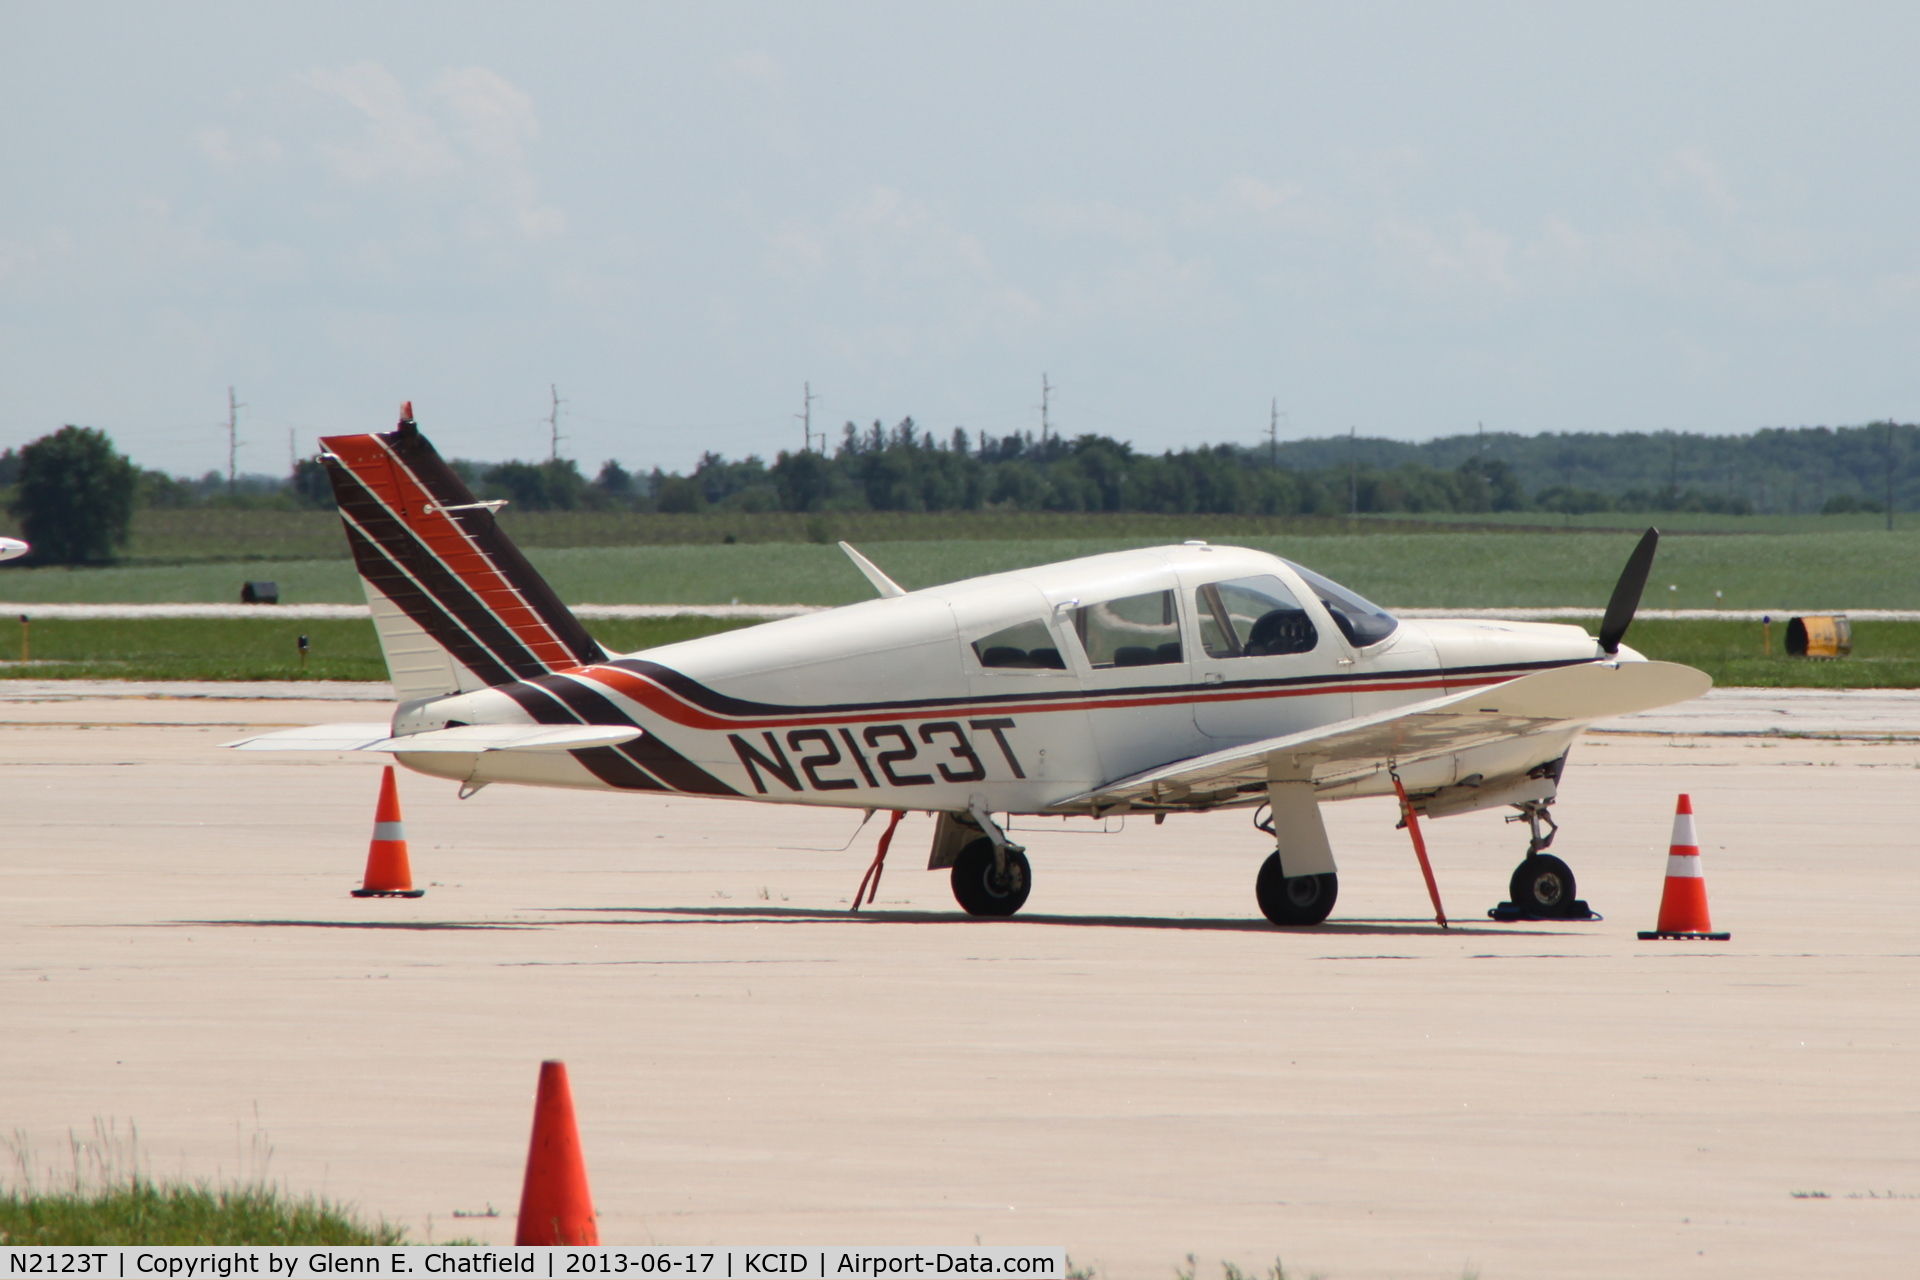 N2123T, 1971 Piper PA-28R-200 C/N 28R-7135066, Parked in front of the control tower